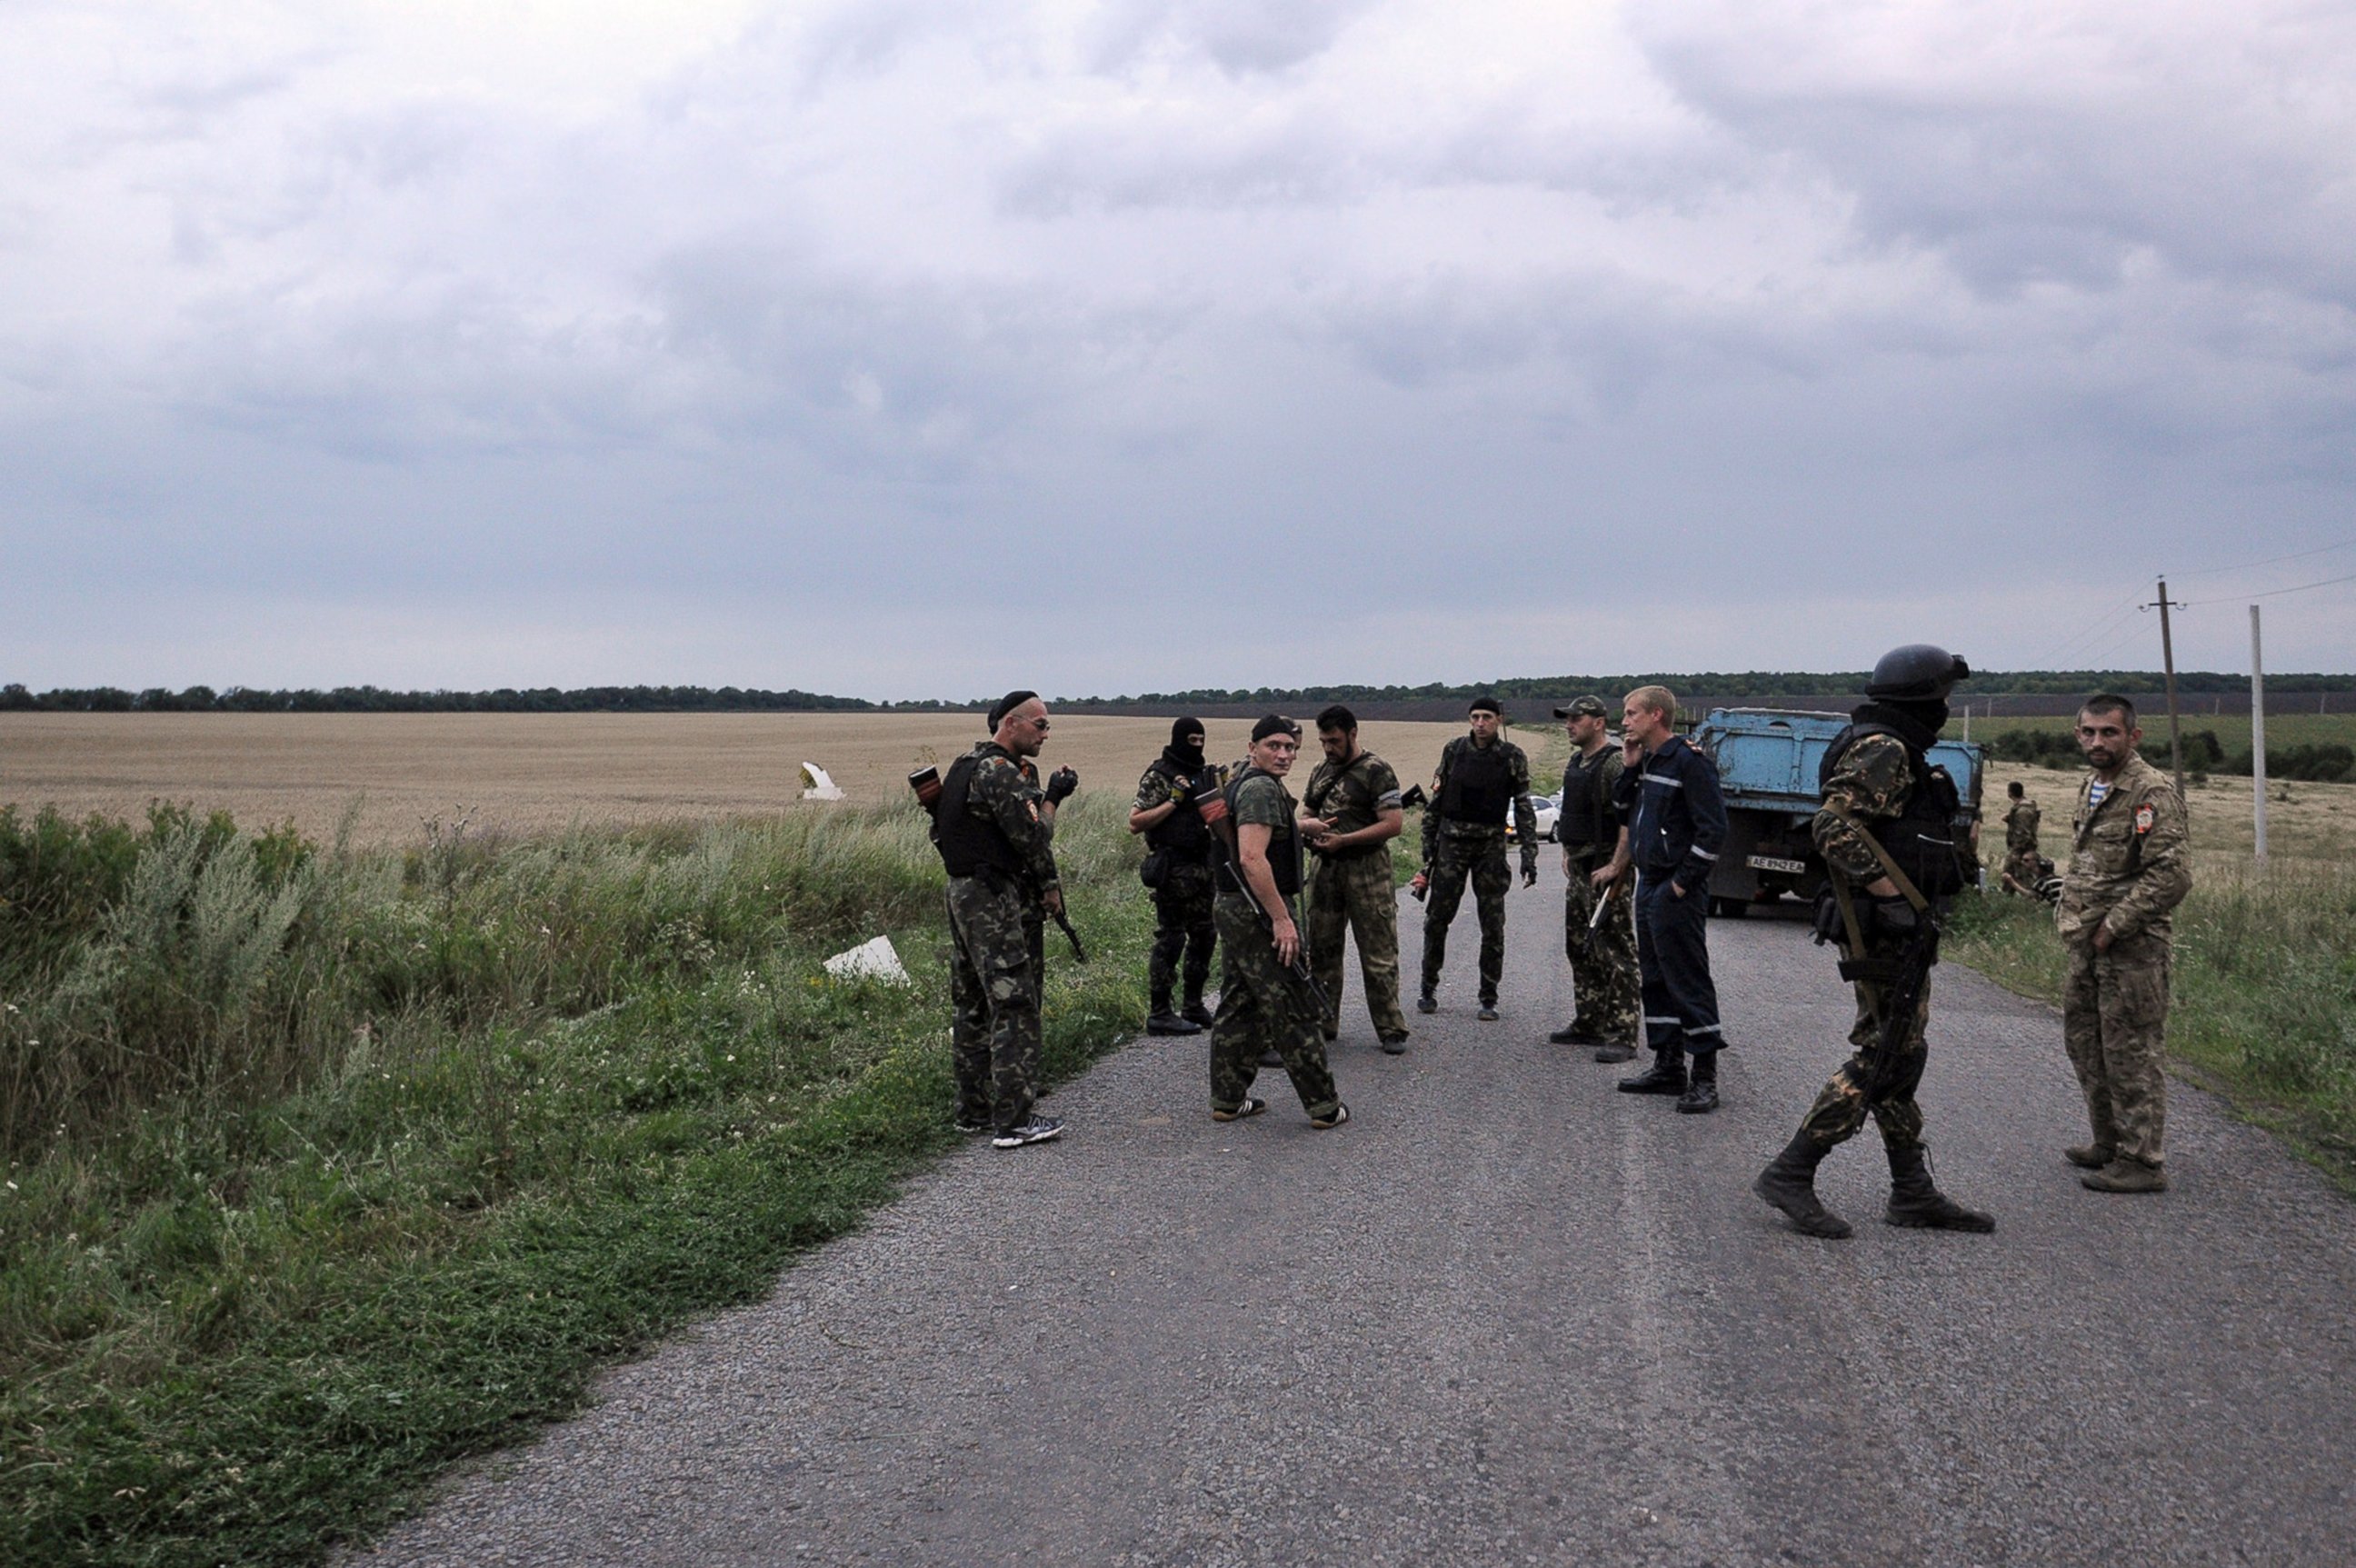 PHOTO: Men wearing military fatigues stand on a road at the site of the wreckage of a Malaysian airliner in rebel-held east Ukraine on July 17, 2014.